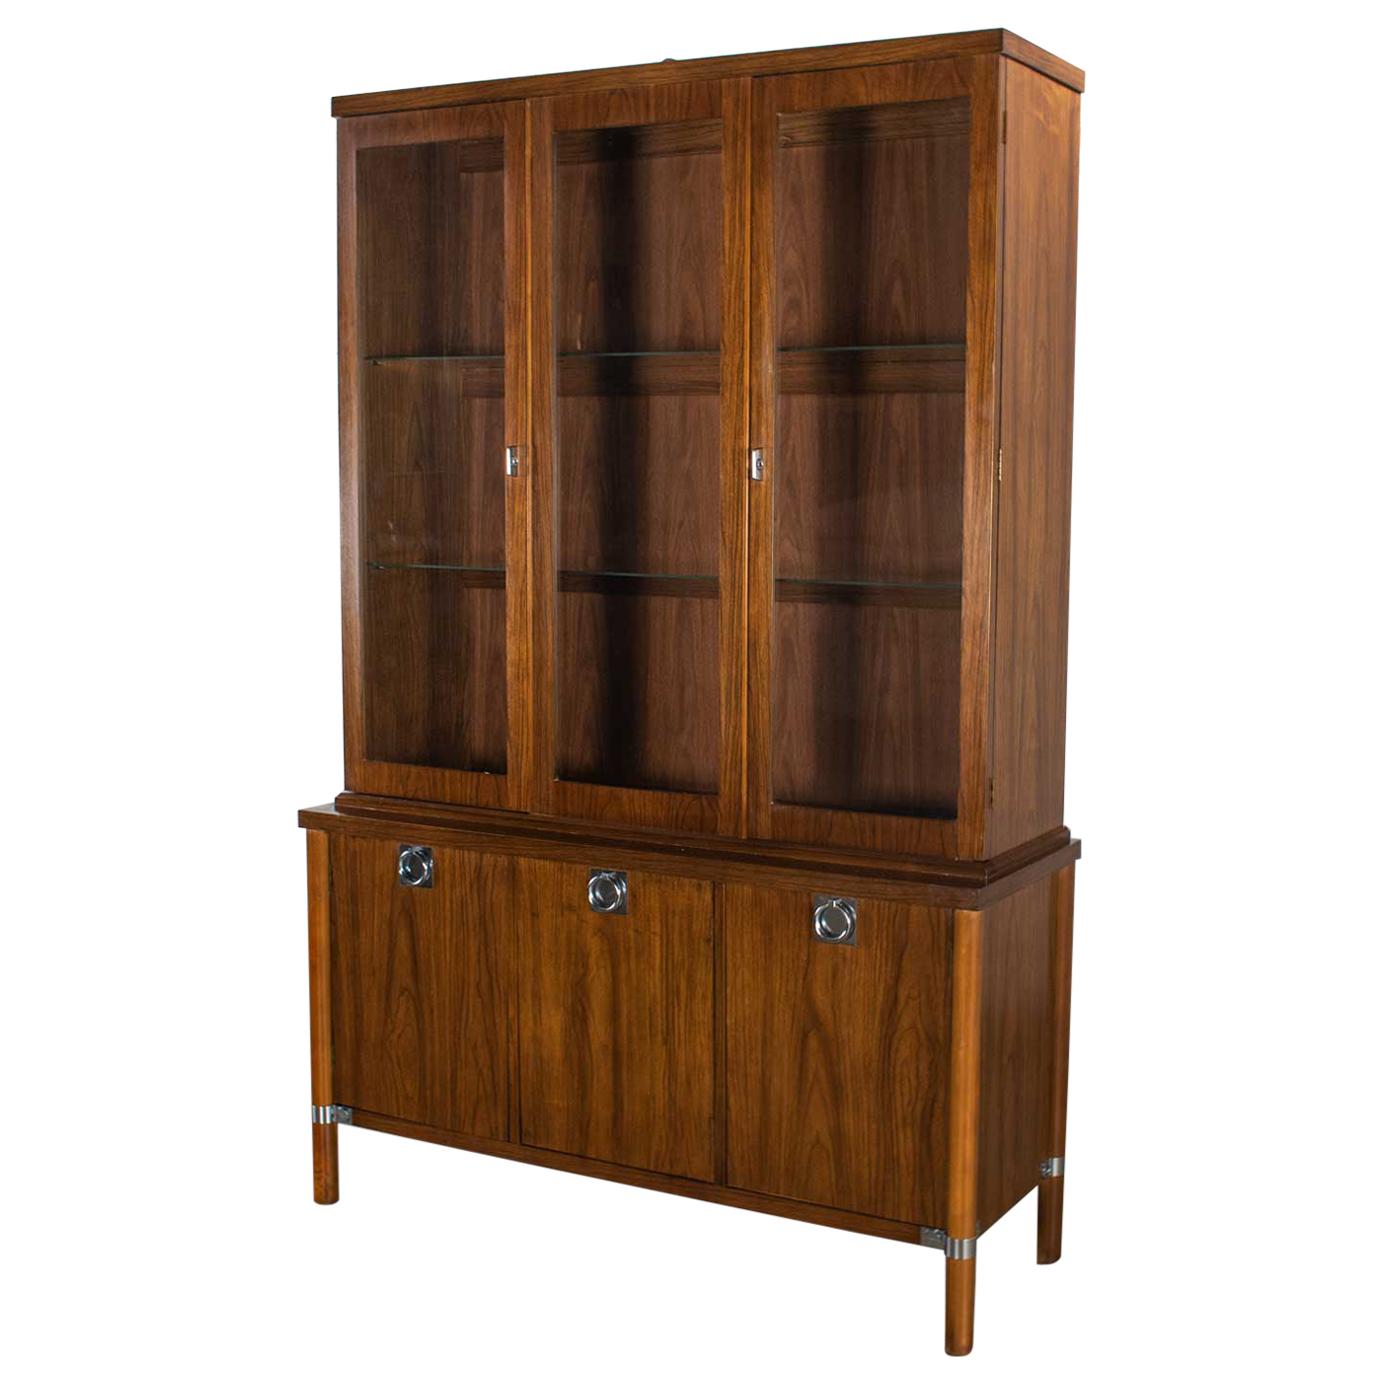 Mid-Century Modern Walnut Lighted China Cabinet with Chrome Accents